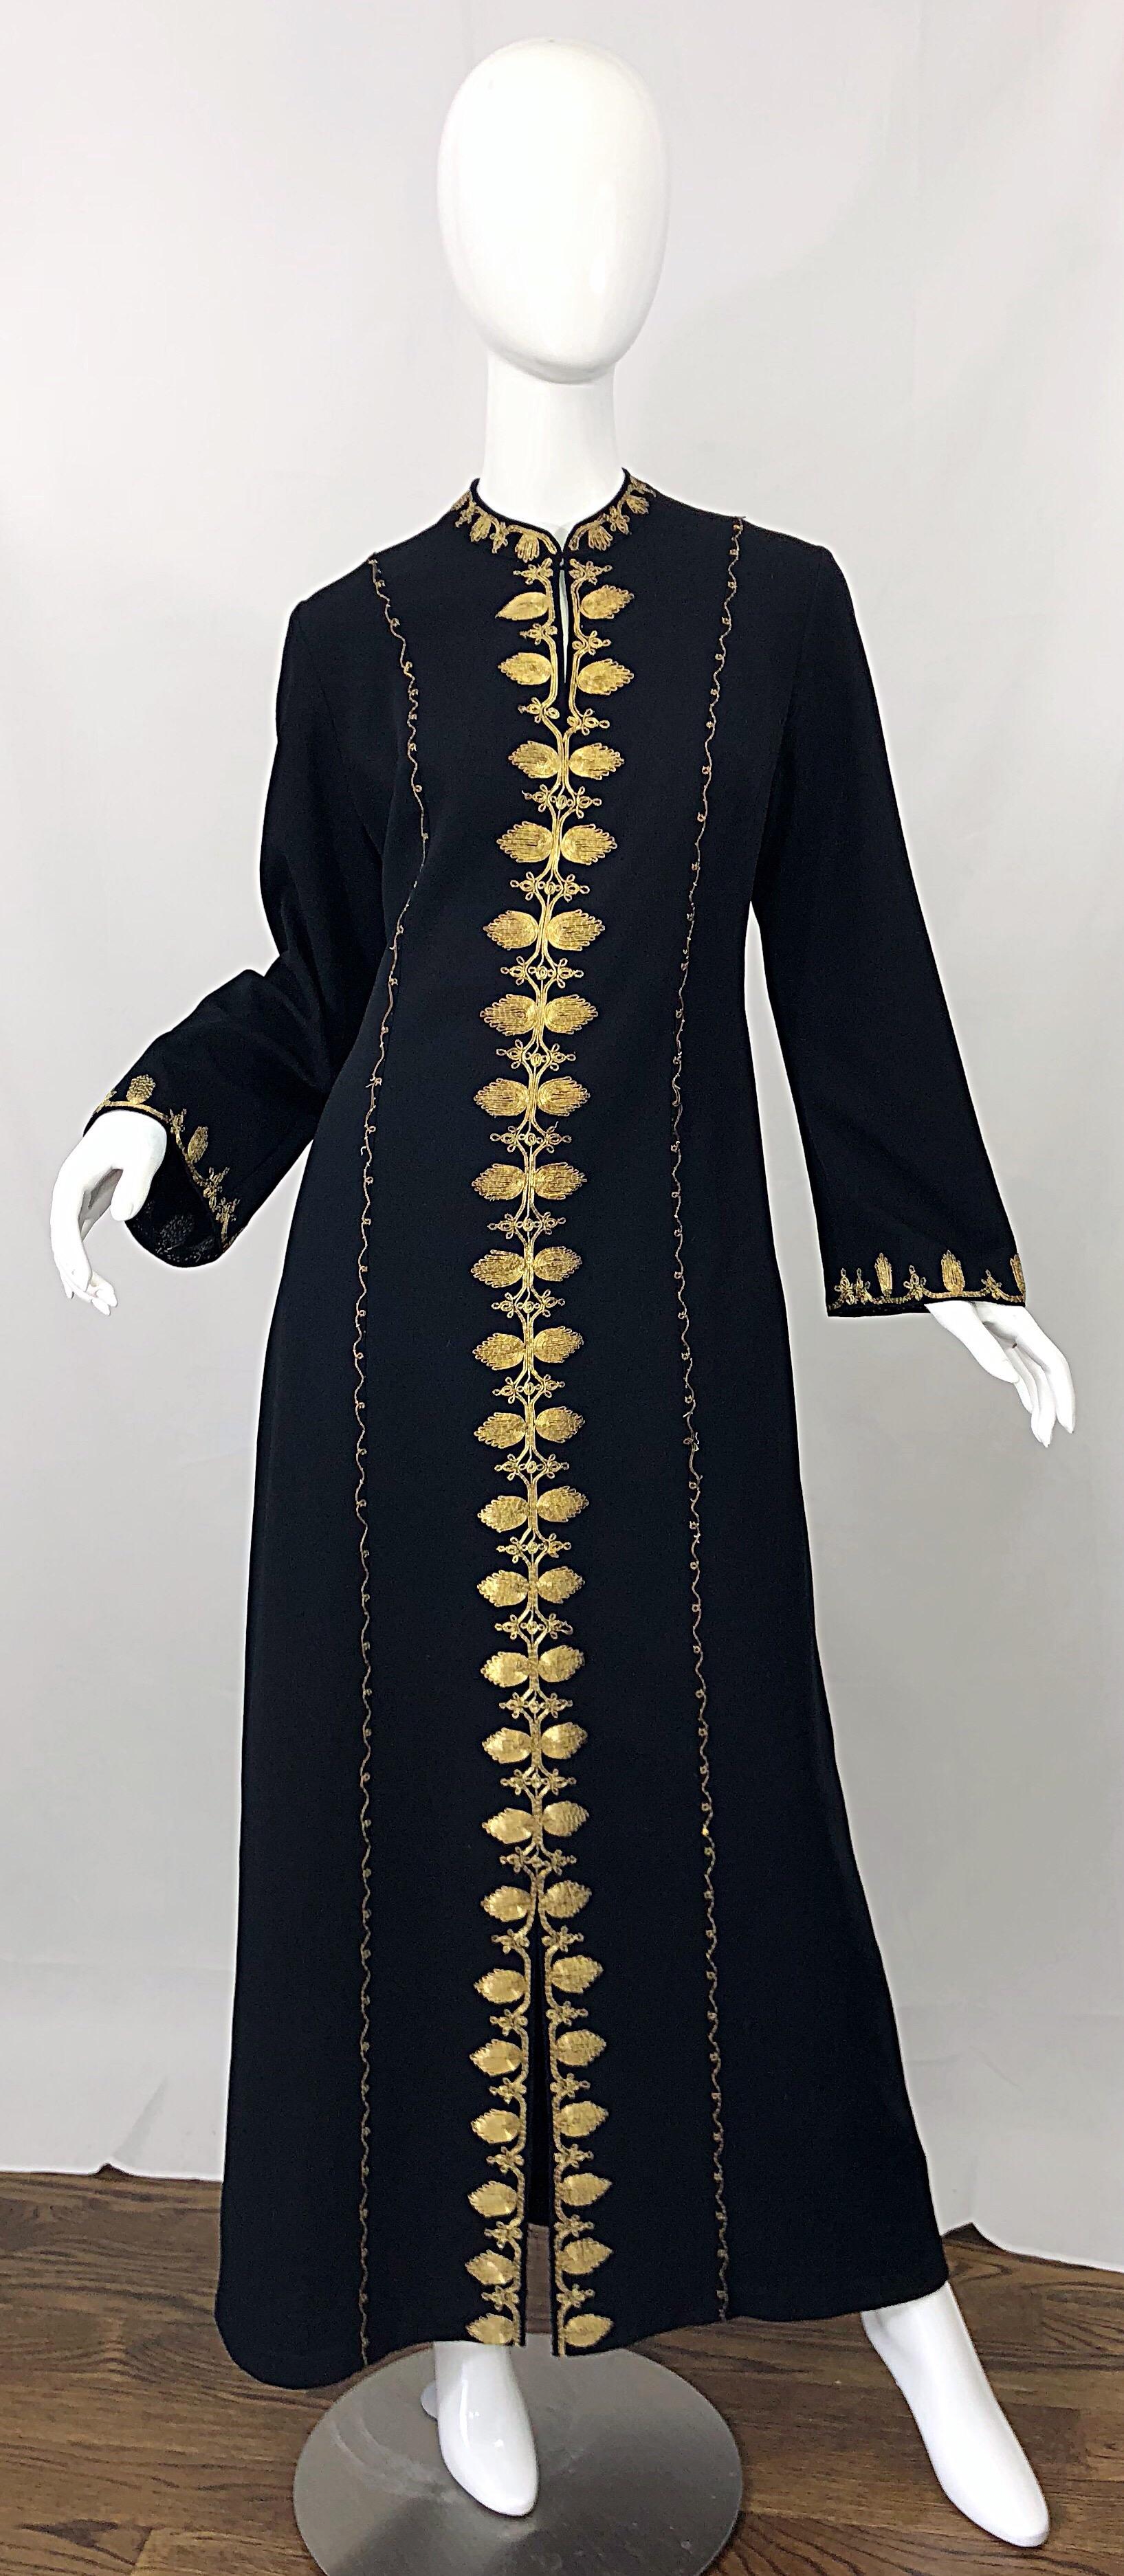 Amazing 1970s black crepe Moroccan long sleeve kaftan maxi dress! Features meticulously embrodiered gold metal throughout. Chic bell /angel sleeved have just the right amount of flare. Hook-and-eye closure at top neck creates a keyhole affect, or